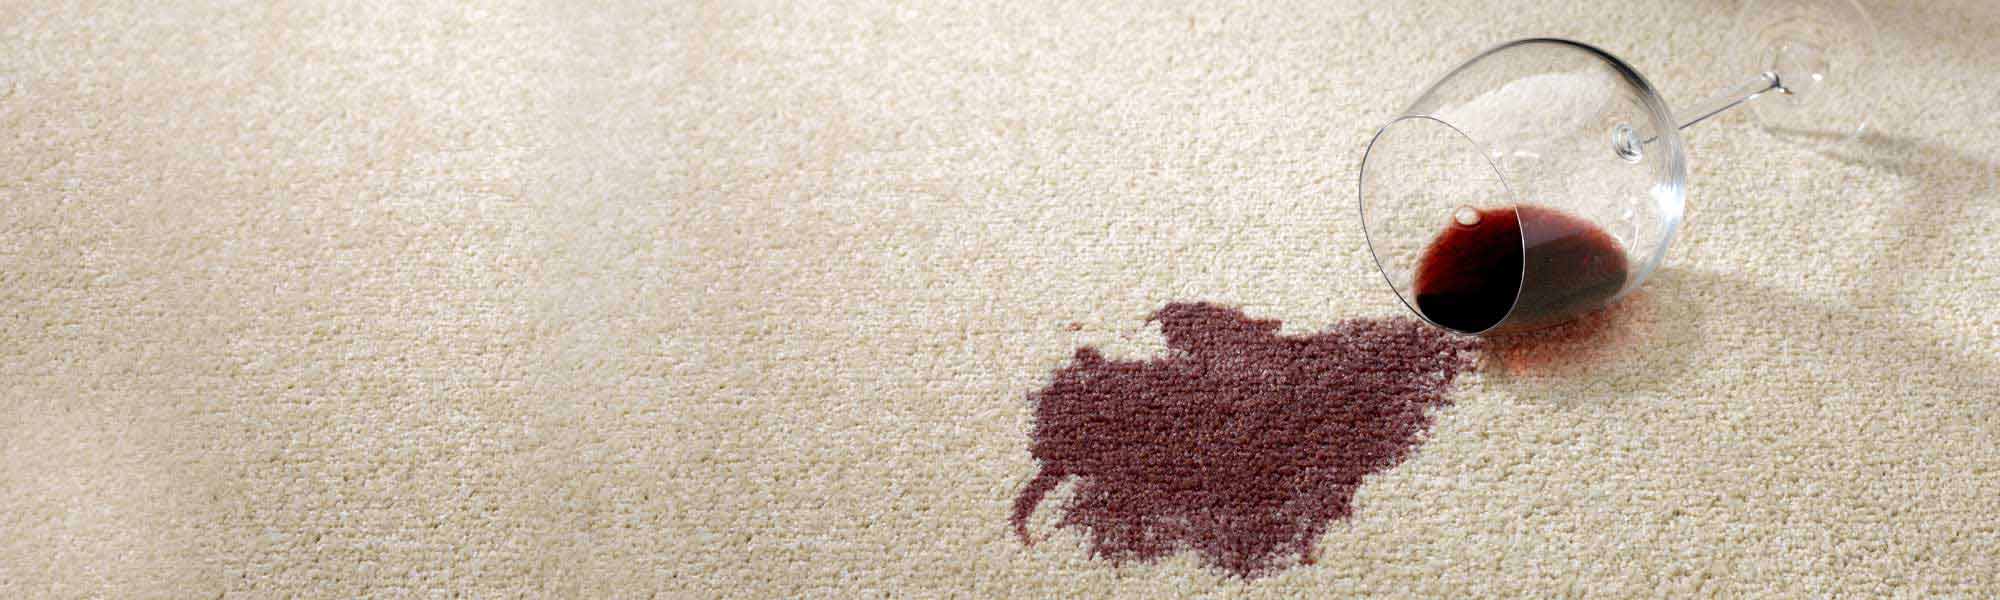 Professional Stain Removal Service In Surrey, BC, By Westcoast Chem-Dry